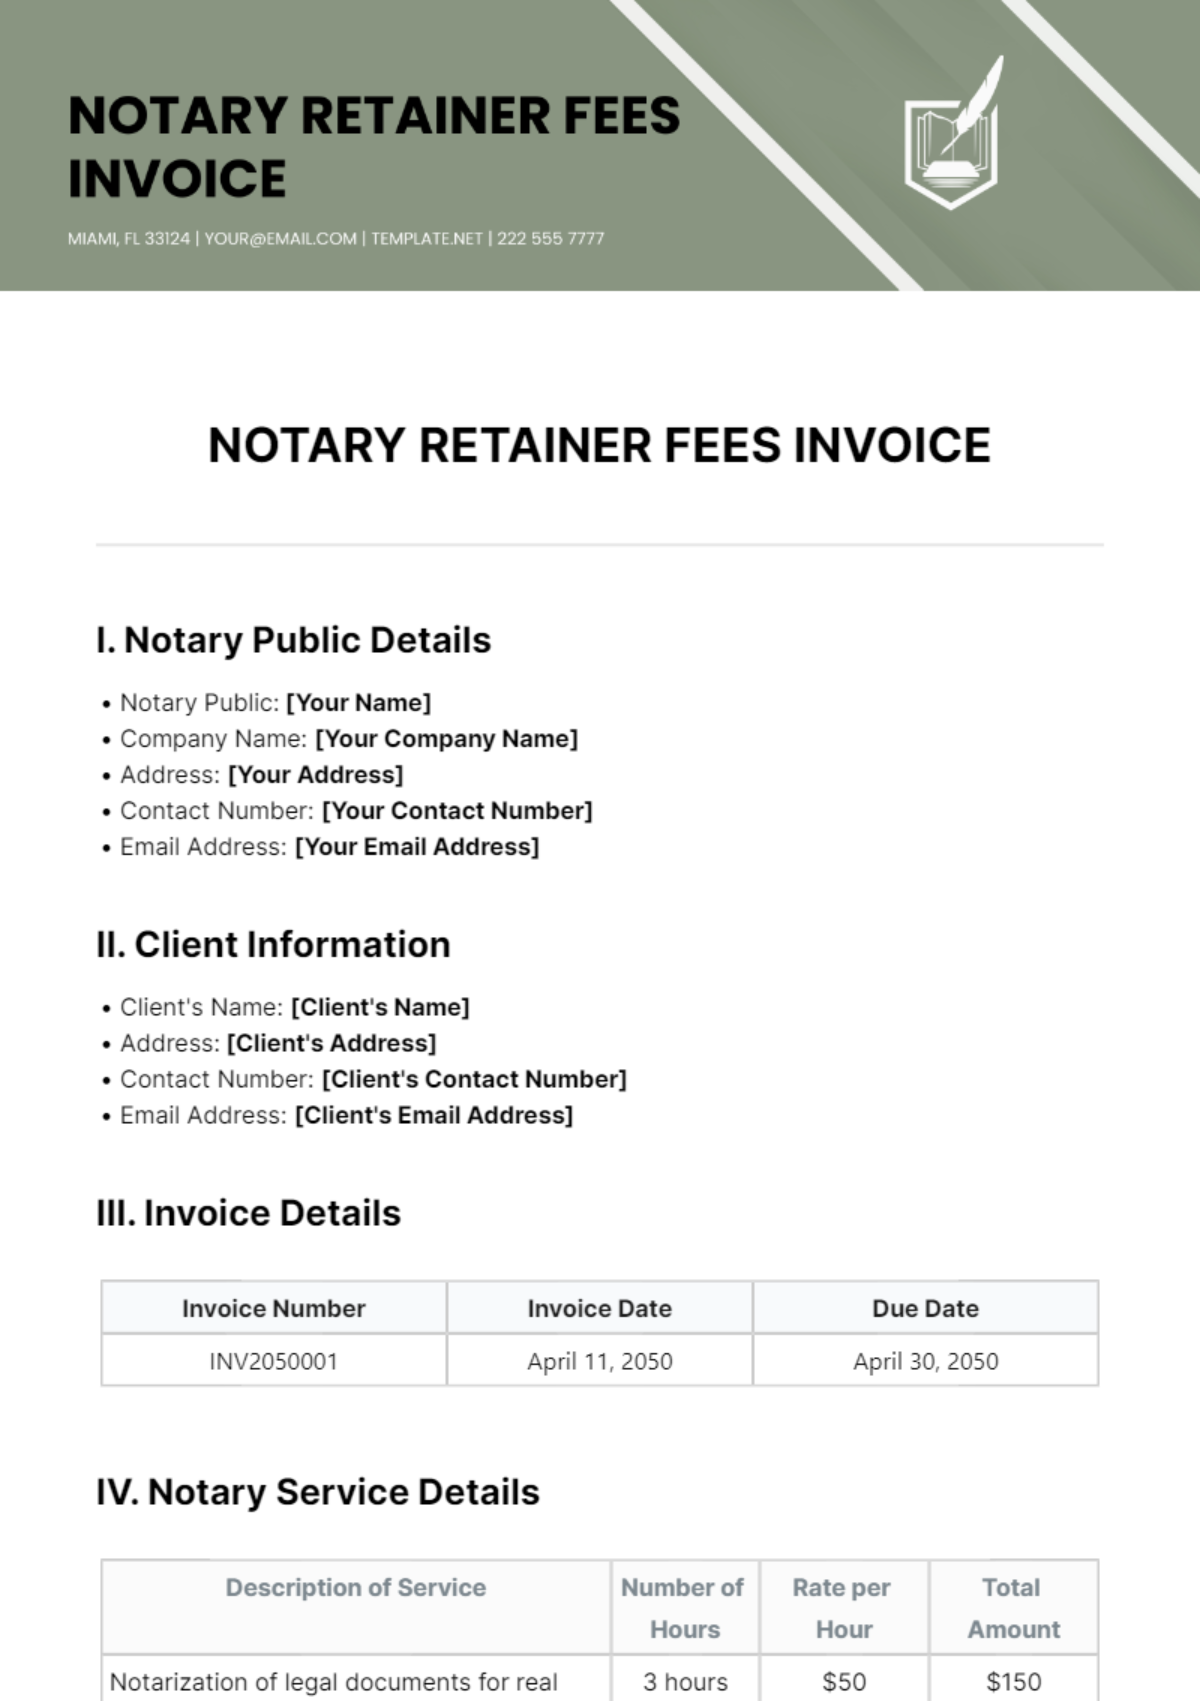 Notary Retainer Fees Invoice Template